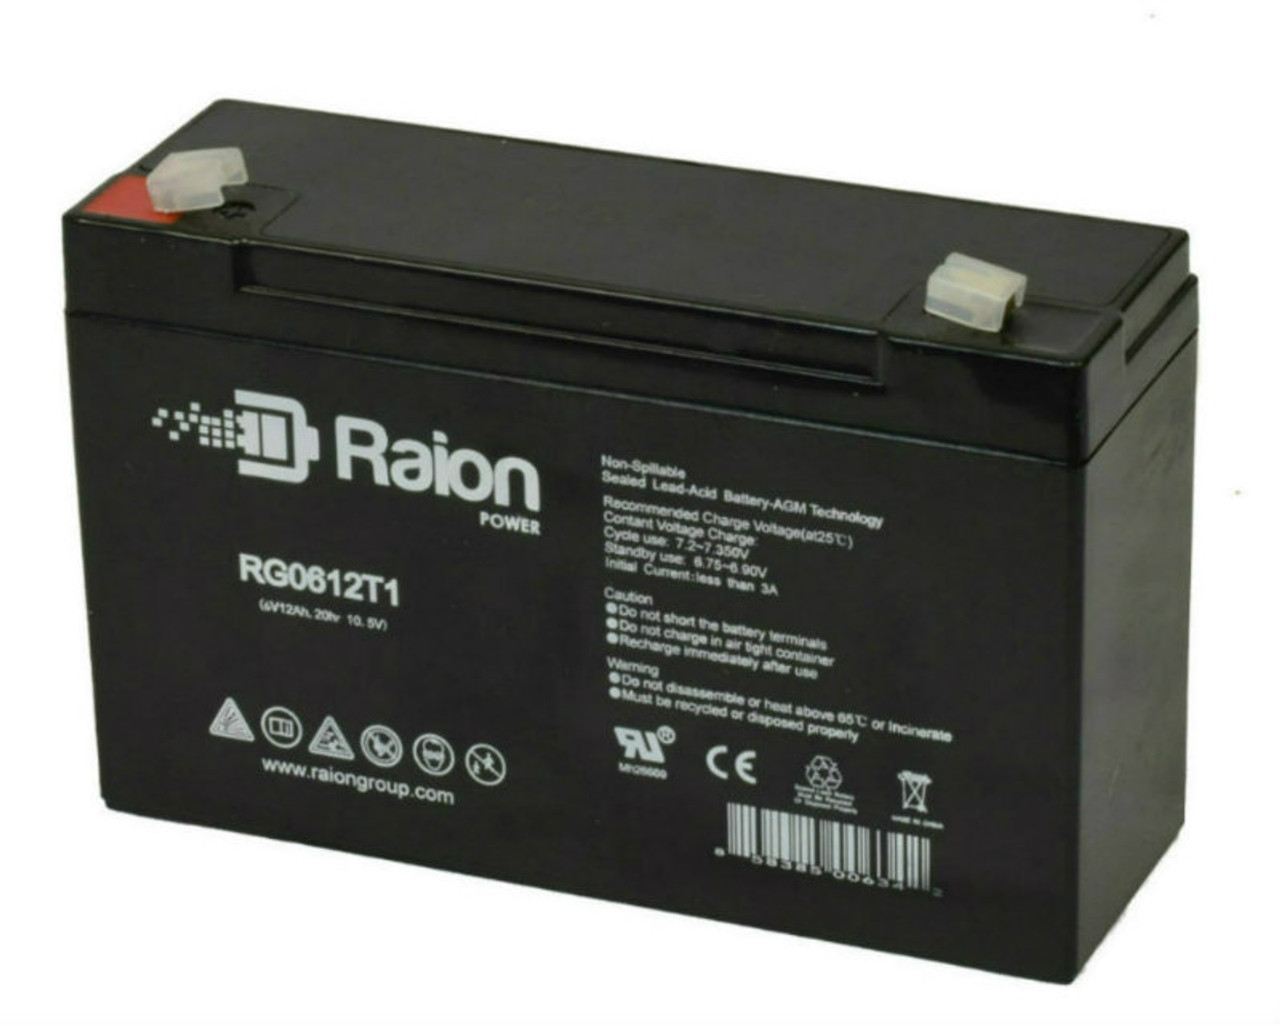 Raion Power RG06120T1 Replacement Emergency Light Battery for Dual-Lite 12-263 / 12263 / 0120263